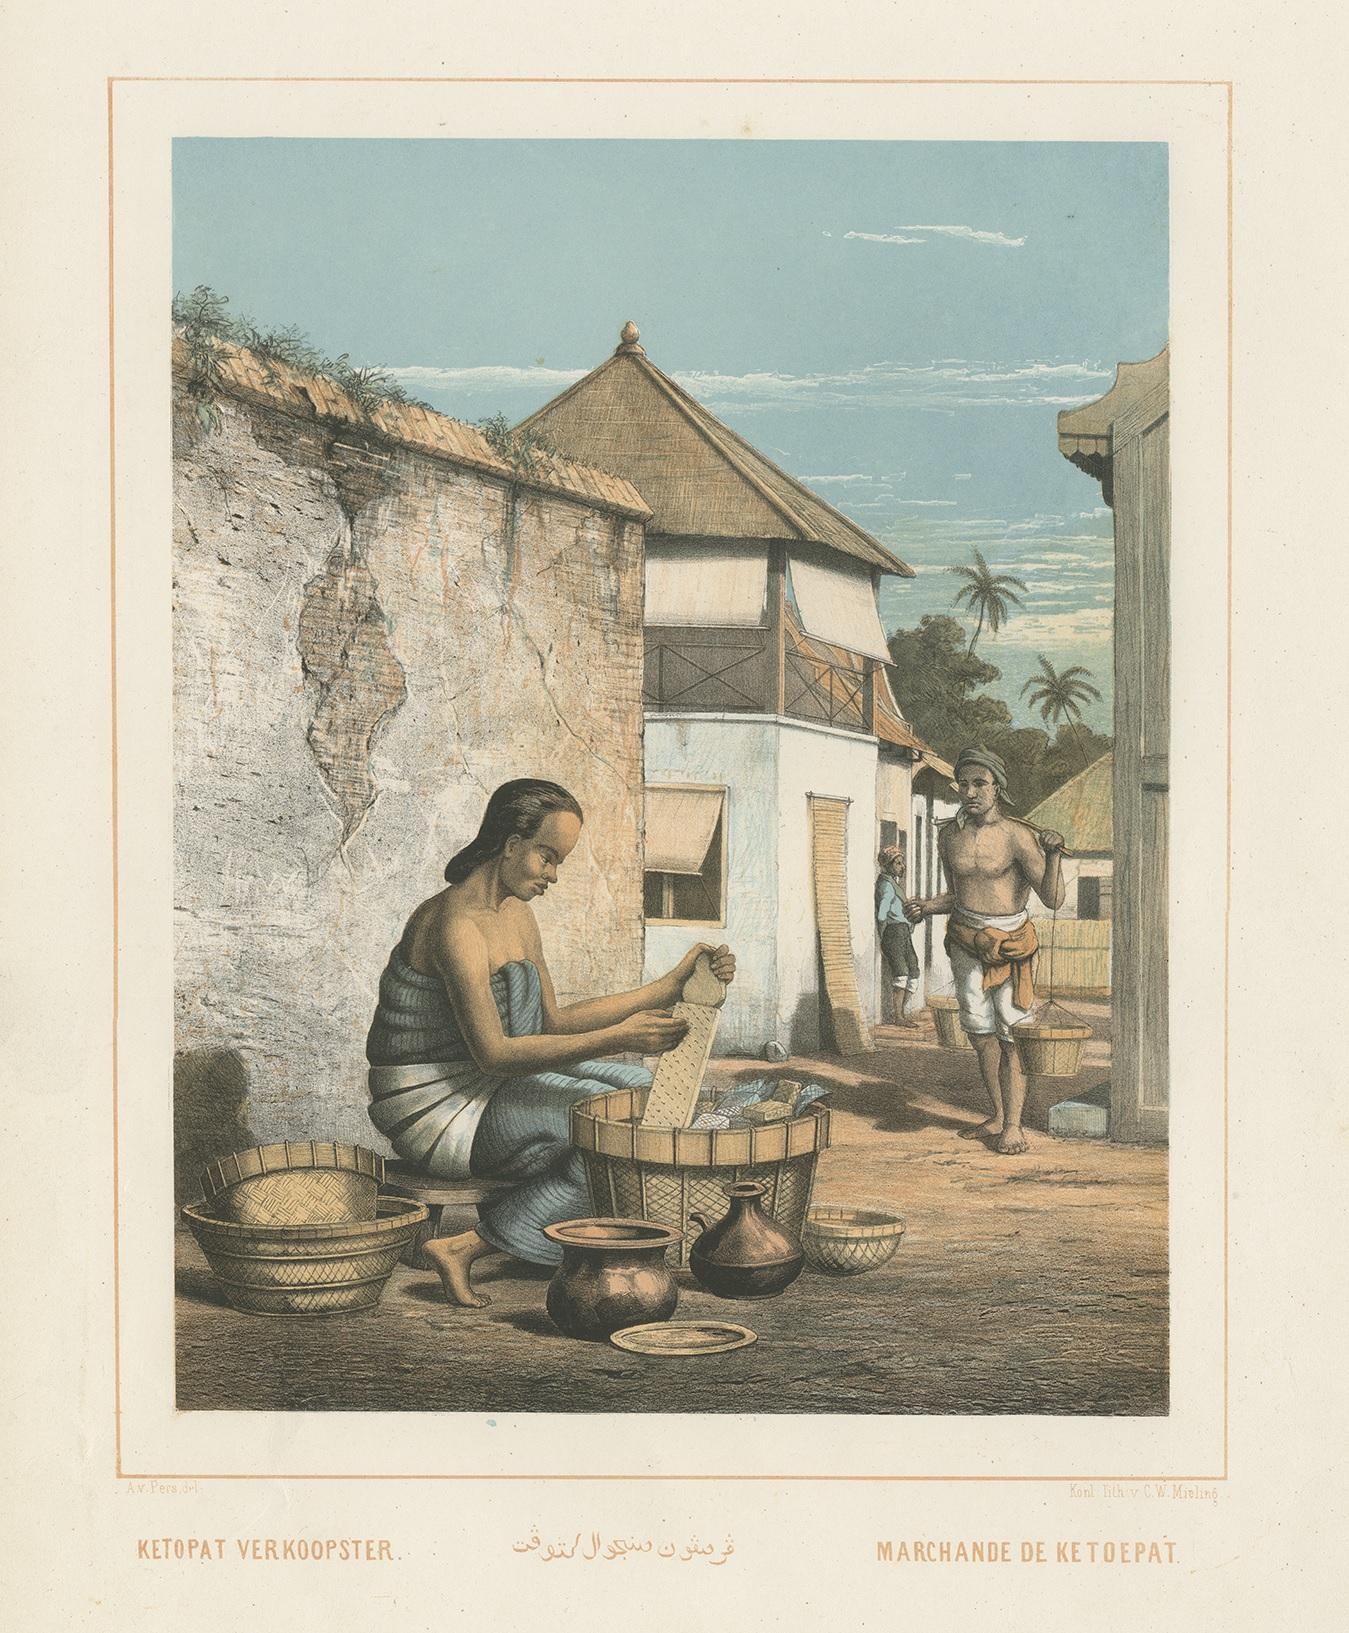 Antique print titled 'Ketopat Verkoopster - Marchande de Ketoepat'. Colored lithograph of a Javanese woman selling ketupat. Ketupat is a rice-based food that is wrapped in the webbing of young coconut leaves or “janur” in Javanese language. This